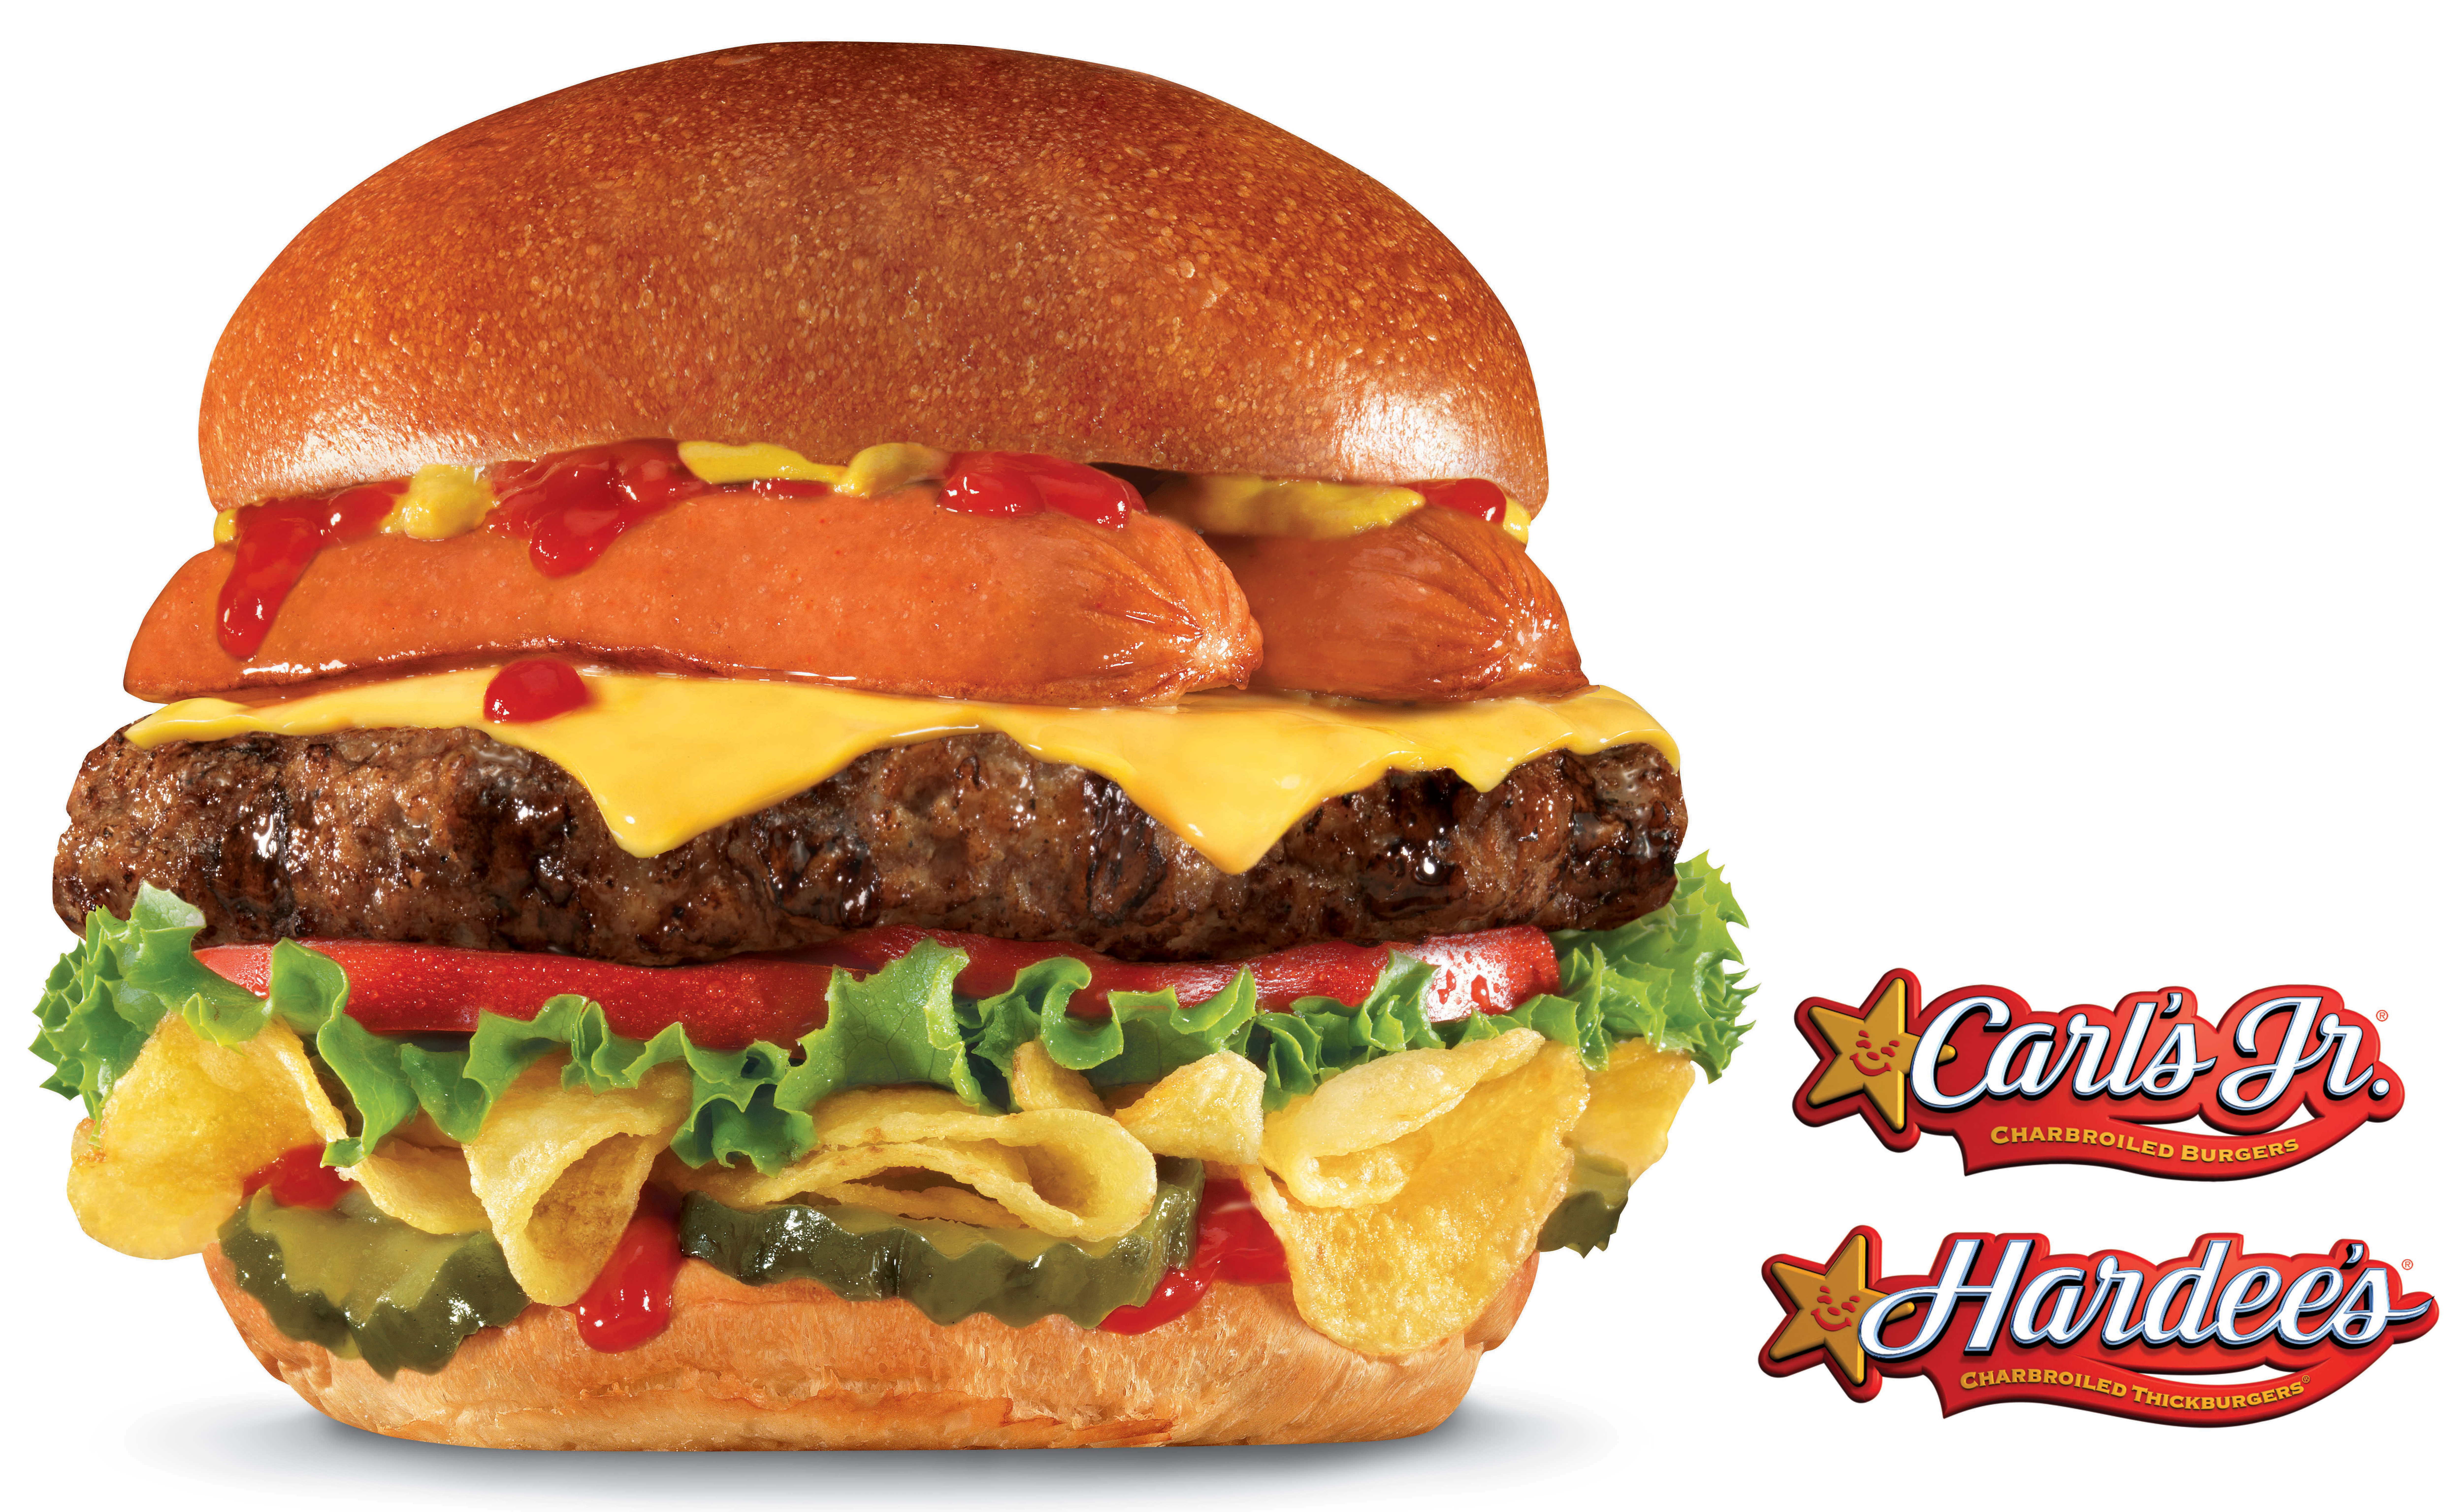 kom Kolonisten Atletisch Carl's Jr. and Hardee's Unveil the Most American Burger Ever | Business Wire